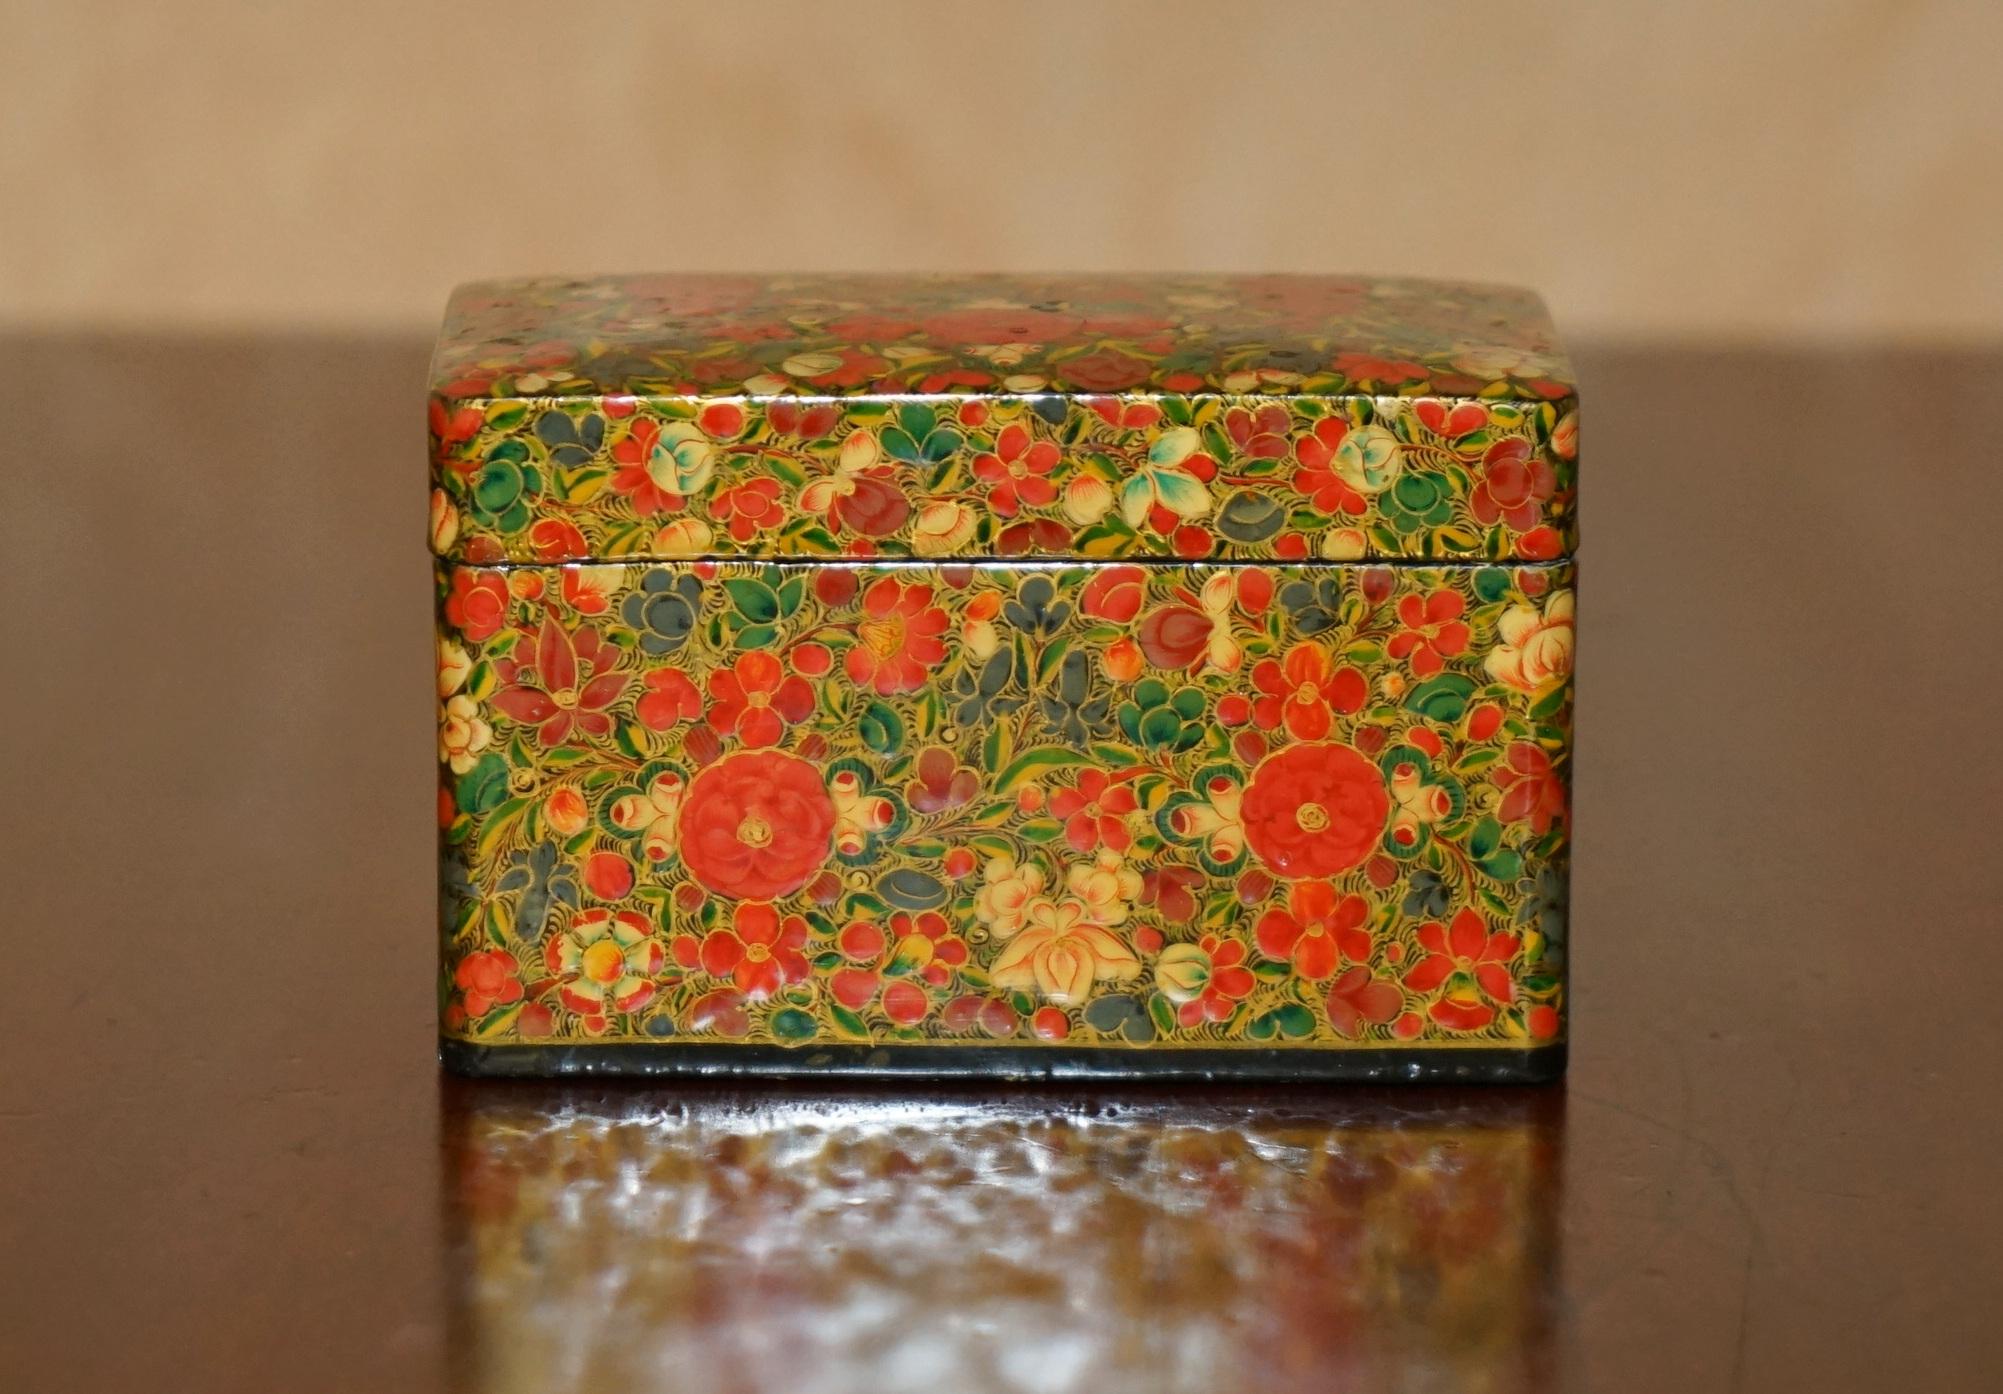 Royal House Antiques

Royal House Antiques is delighted to offer for sale this lovely, super decorative antique Kashmir playing carved box with period paper mâché finish

A wonderfully original find, this isn’t one of the much later reproductions